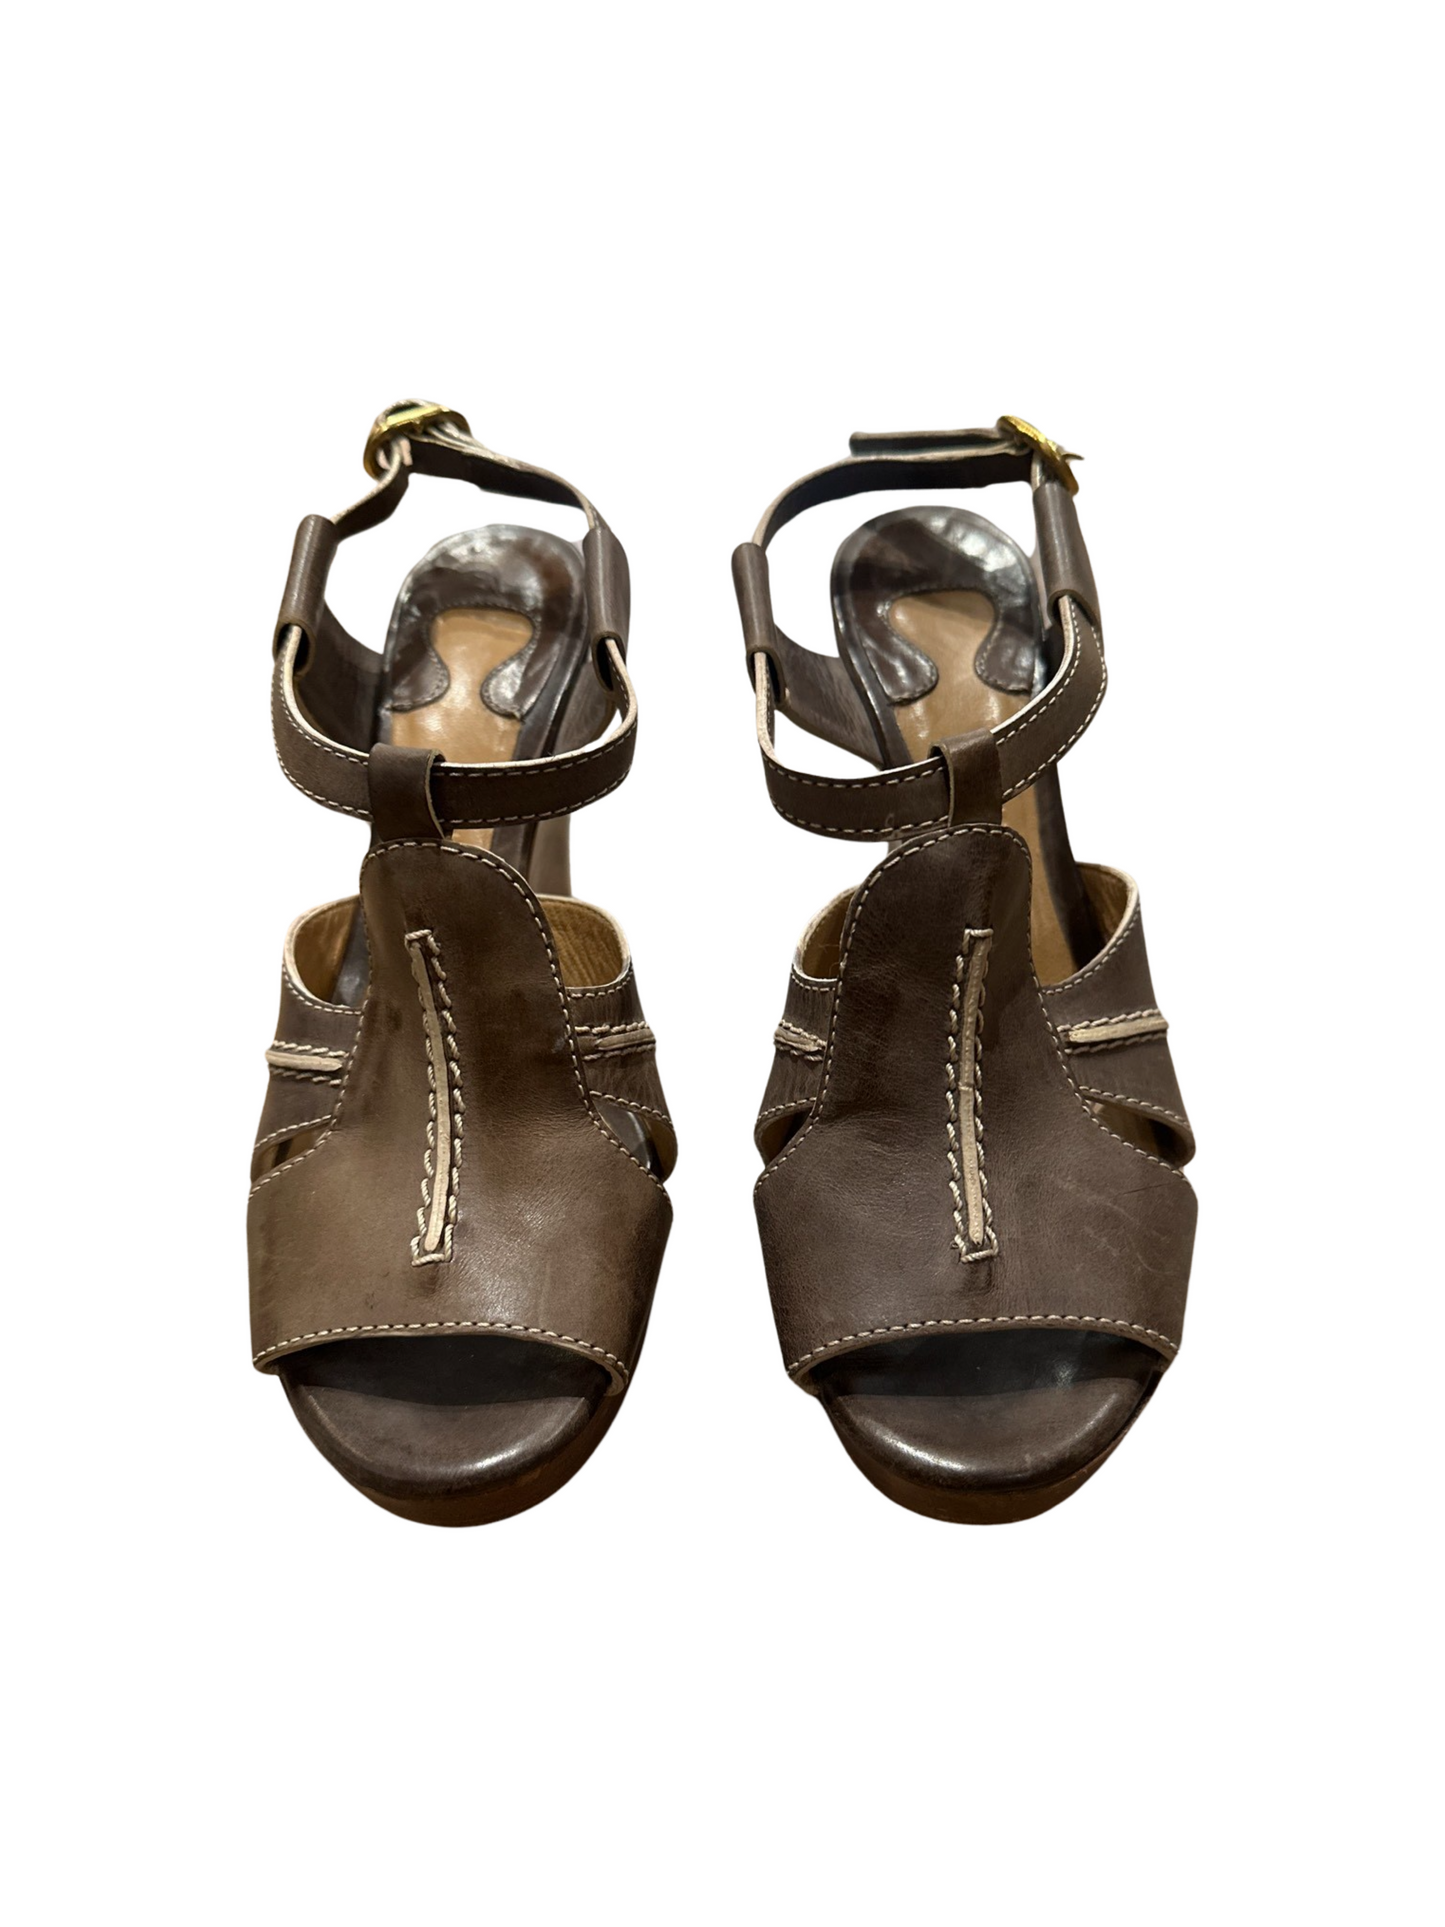 Chloé Leather and wood wedges 36